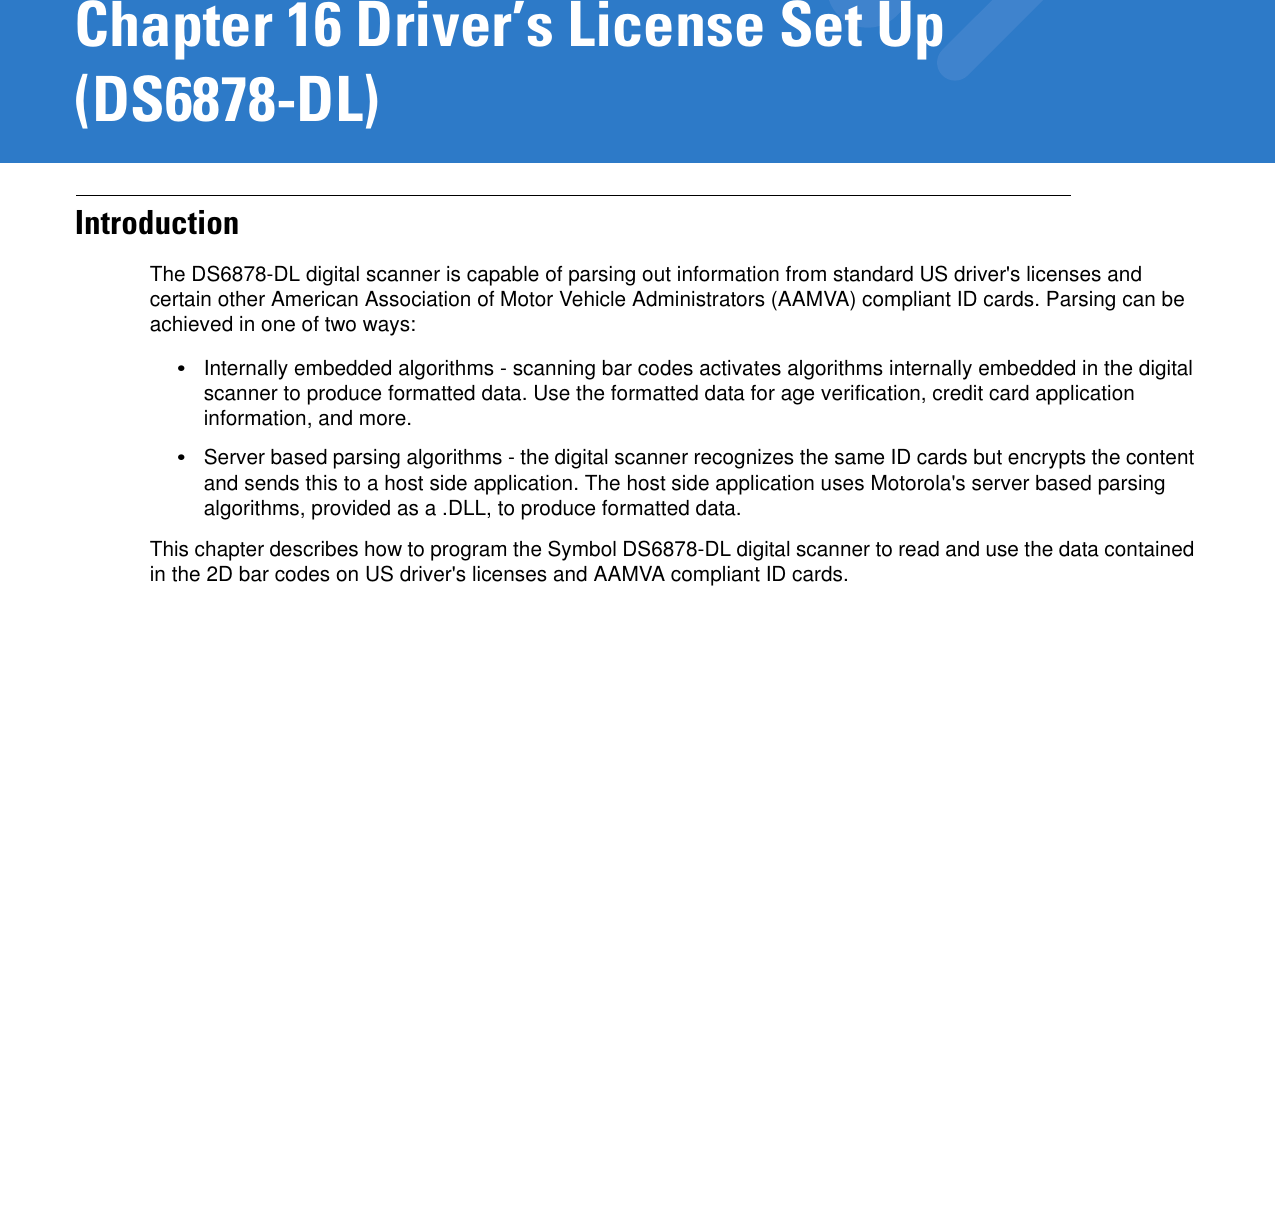 Chapter 16 Driver’s License Set Up (DS6878-DL)IntroductionThe DS6878-DL digital scanner is capable of parsing out information from standard US driver&apos;s licenses and certain other American Association of Motor Vehicle Administrators (AAMVA) compliant ID cards. Parsing can be achieved in one of two ways: •Internally embedded algorithms - scanning bar codes activates algorithms internally embedded in the digital scanner to produce formatted data. Use the formatted data for age verification, credit card application information, and more.•Server based parsing algorithms - the digital scanner recognizes the same ID cards but encrypts the content and sends this to a host side application. The host side application uses Motorola&apos;s server based parsing algorithms, provided as a .DLL, to produce formatted data.This chapter describes how to program the Symbol DS6878-DL digital scanner to read and use the data contained in the 2D bar codes on US driver&apos;s licenses and AAMVA compliant ID cards.